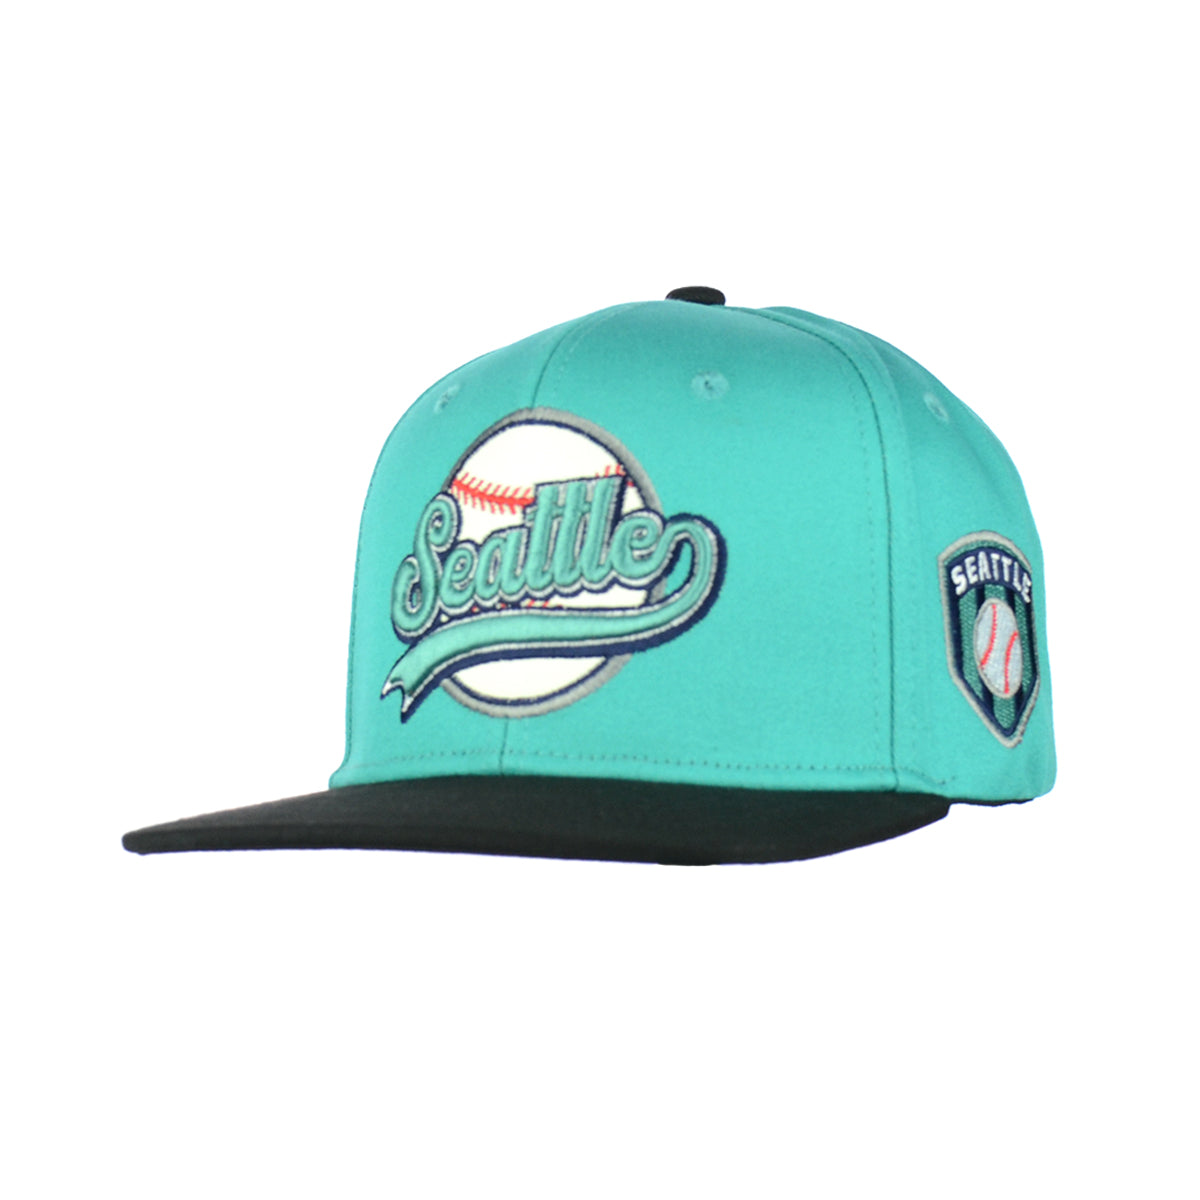 Seattle Embroidered Snapback Hat